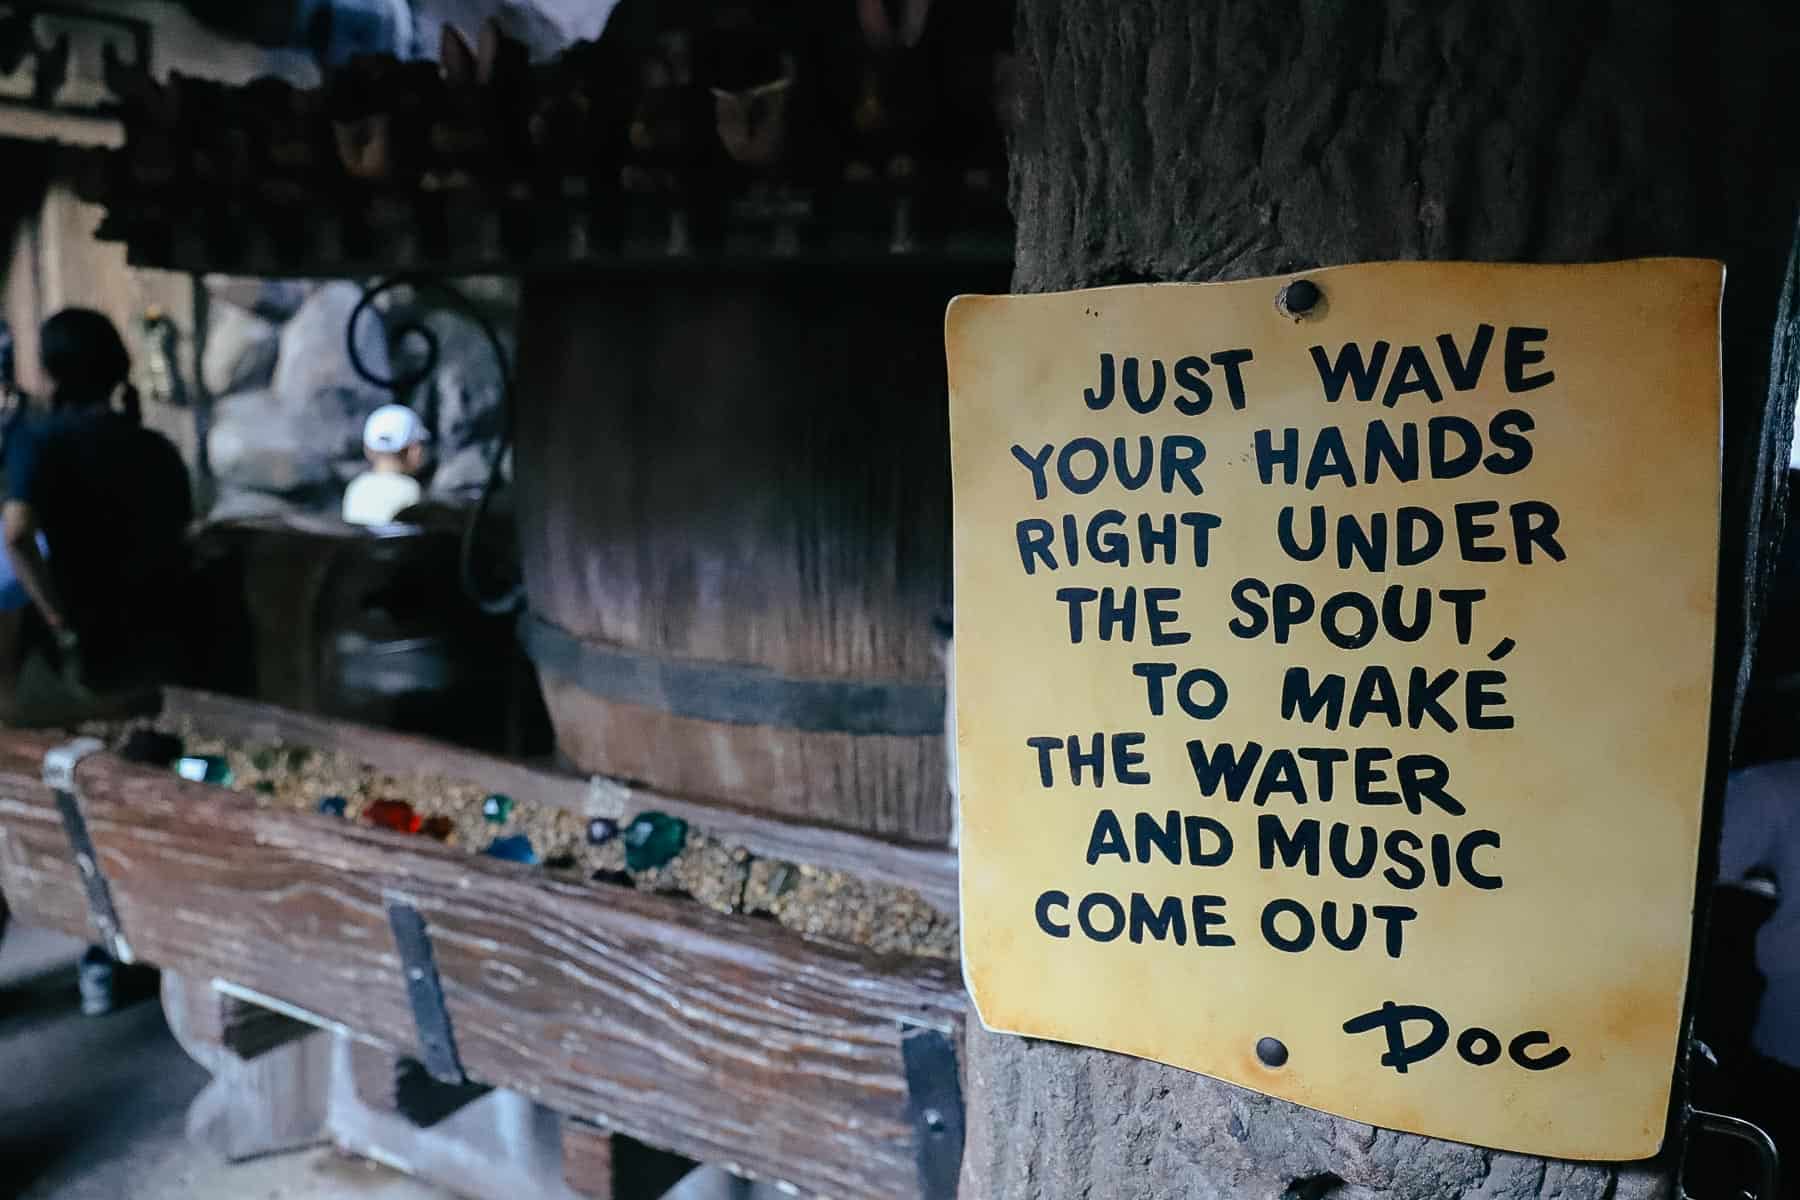 An interactive queue element sign that reads "Just wave your hands right under the spout, to make the water and music come out." 